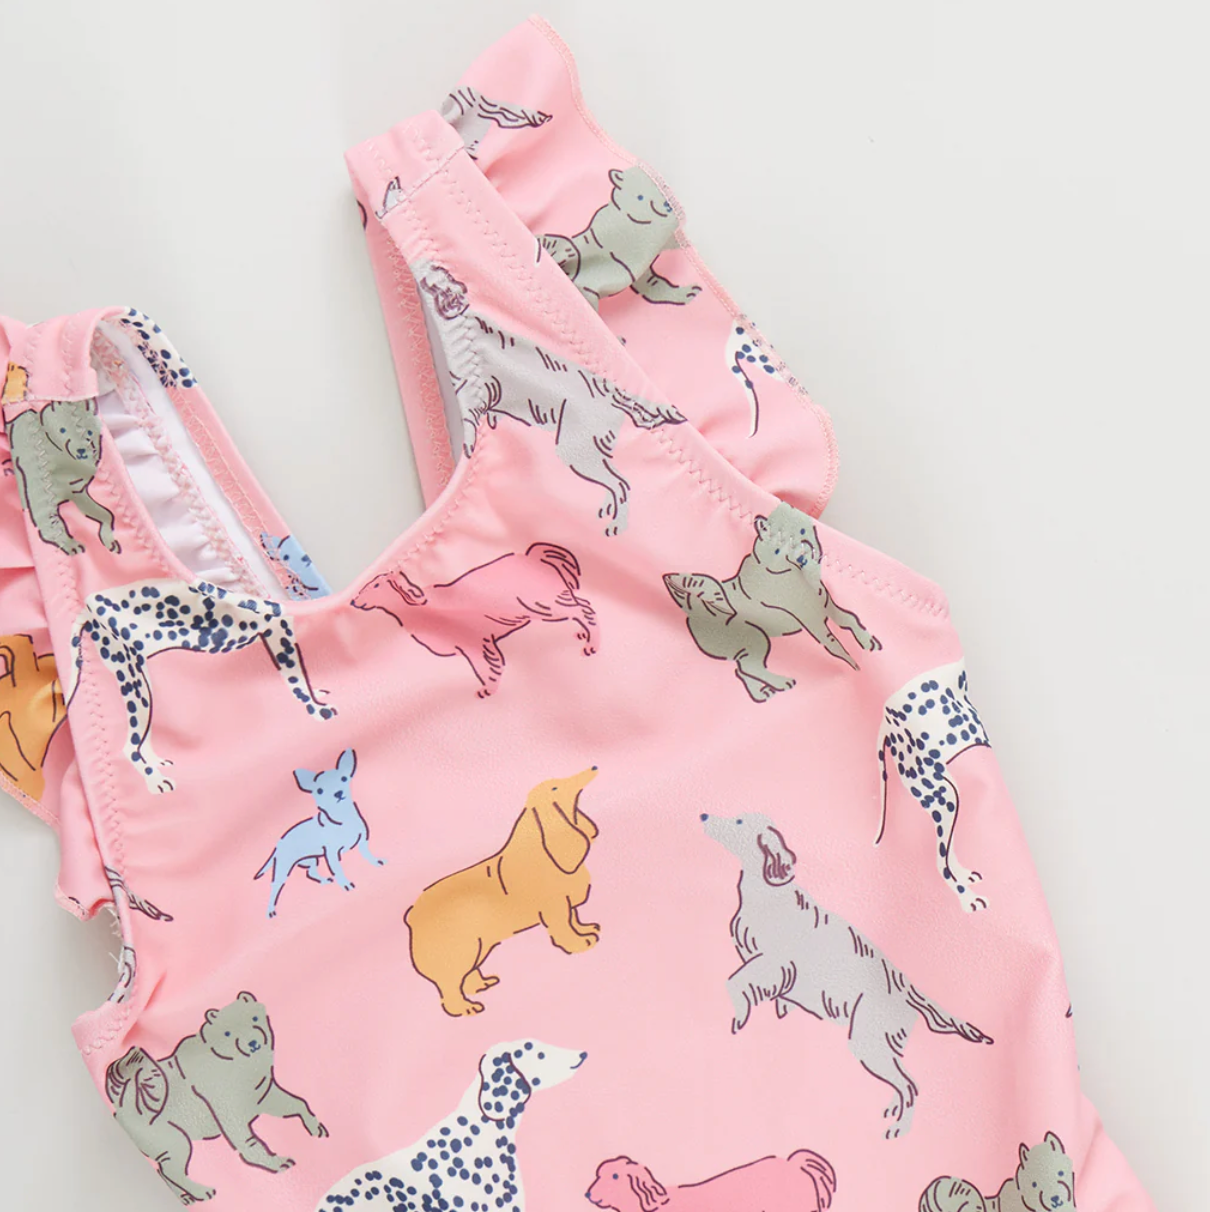 Girls Liv Suit - Pink Dogs